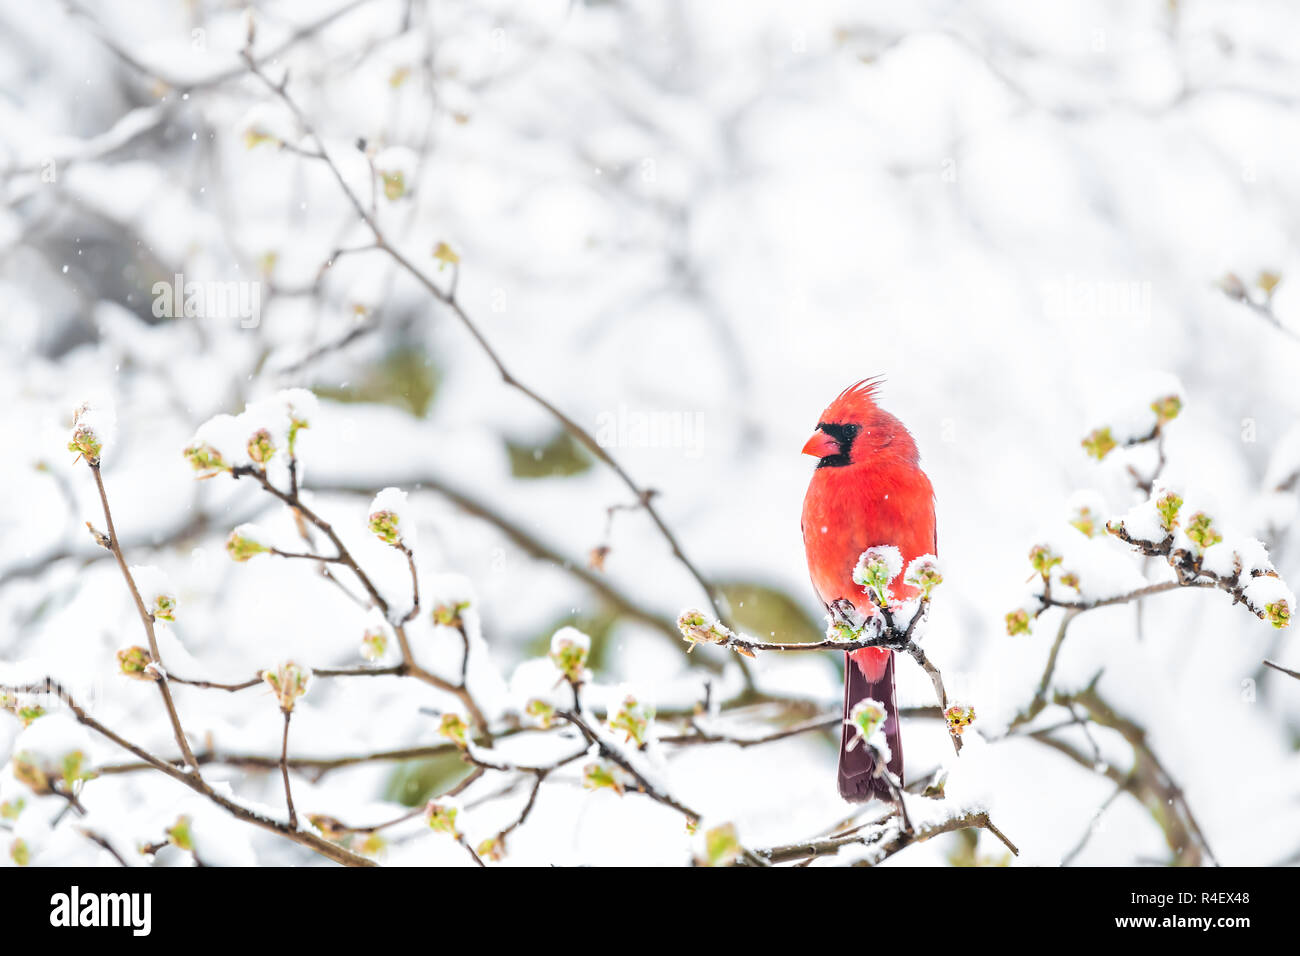 Closeup of fluffed, puffed up red male cardinal bird, looking, perched on sakura, cherry tree branch, covered in falling snow with buds, heavy snowing Stock Photo